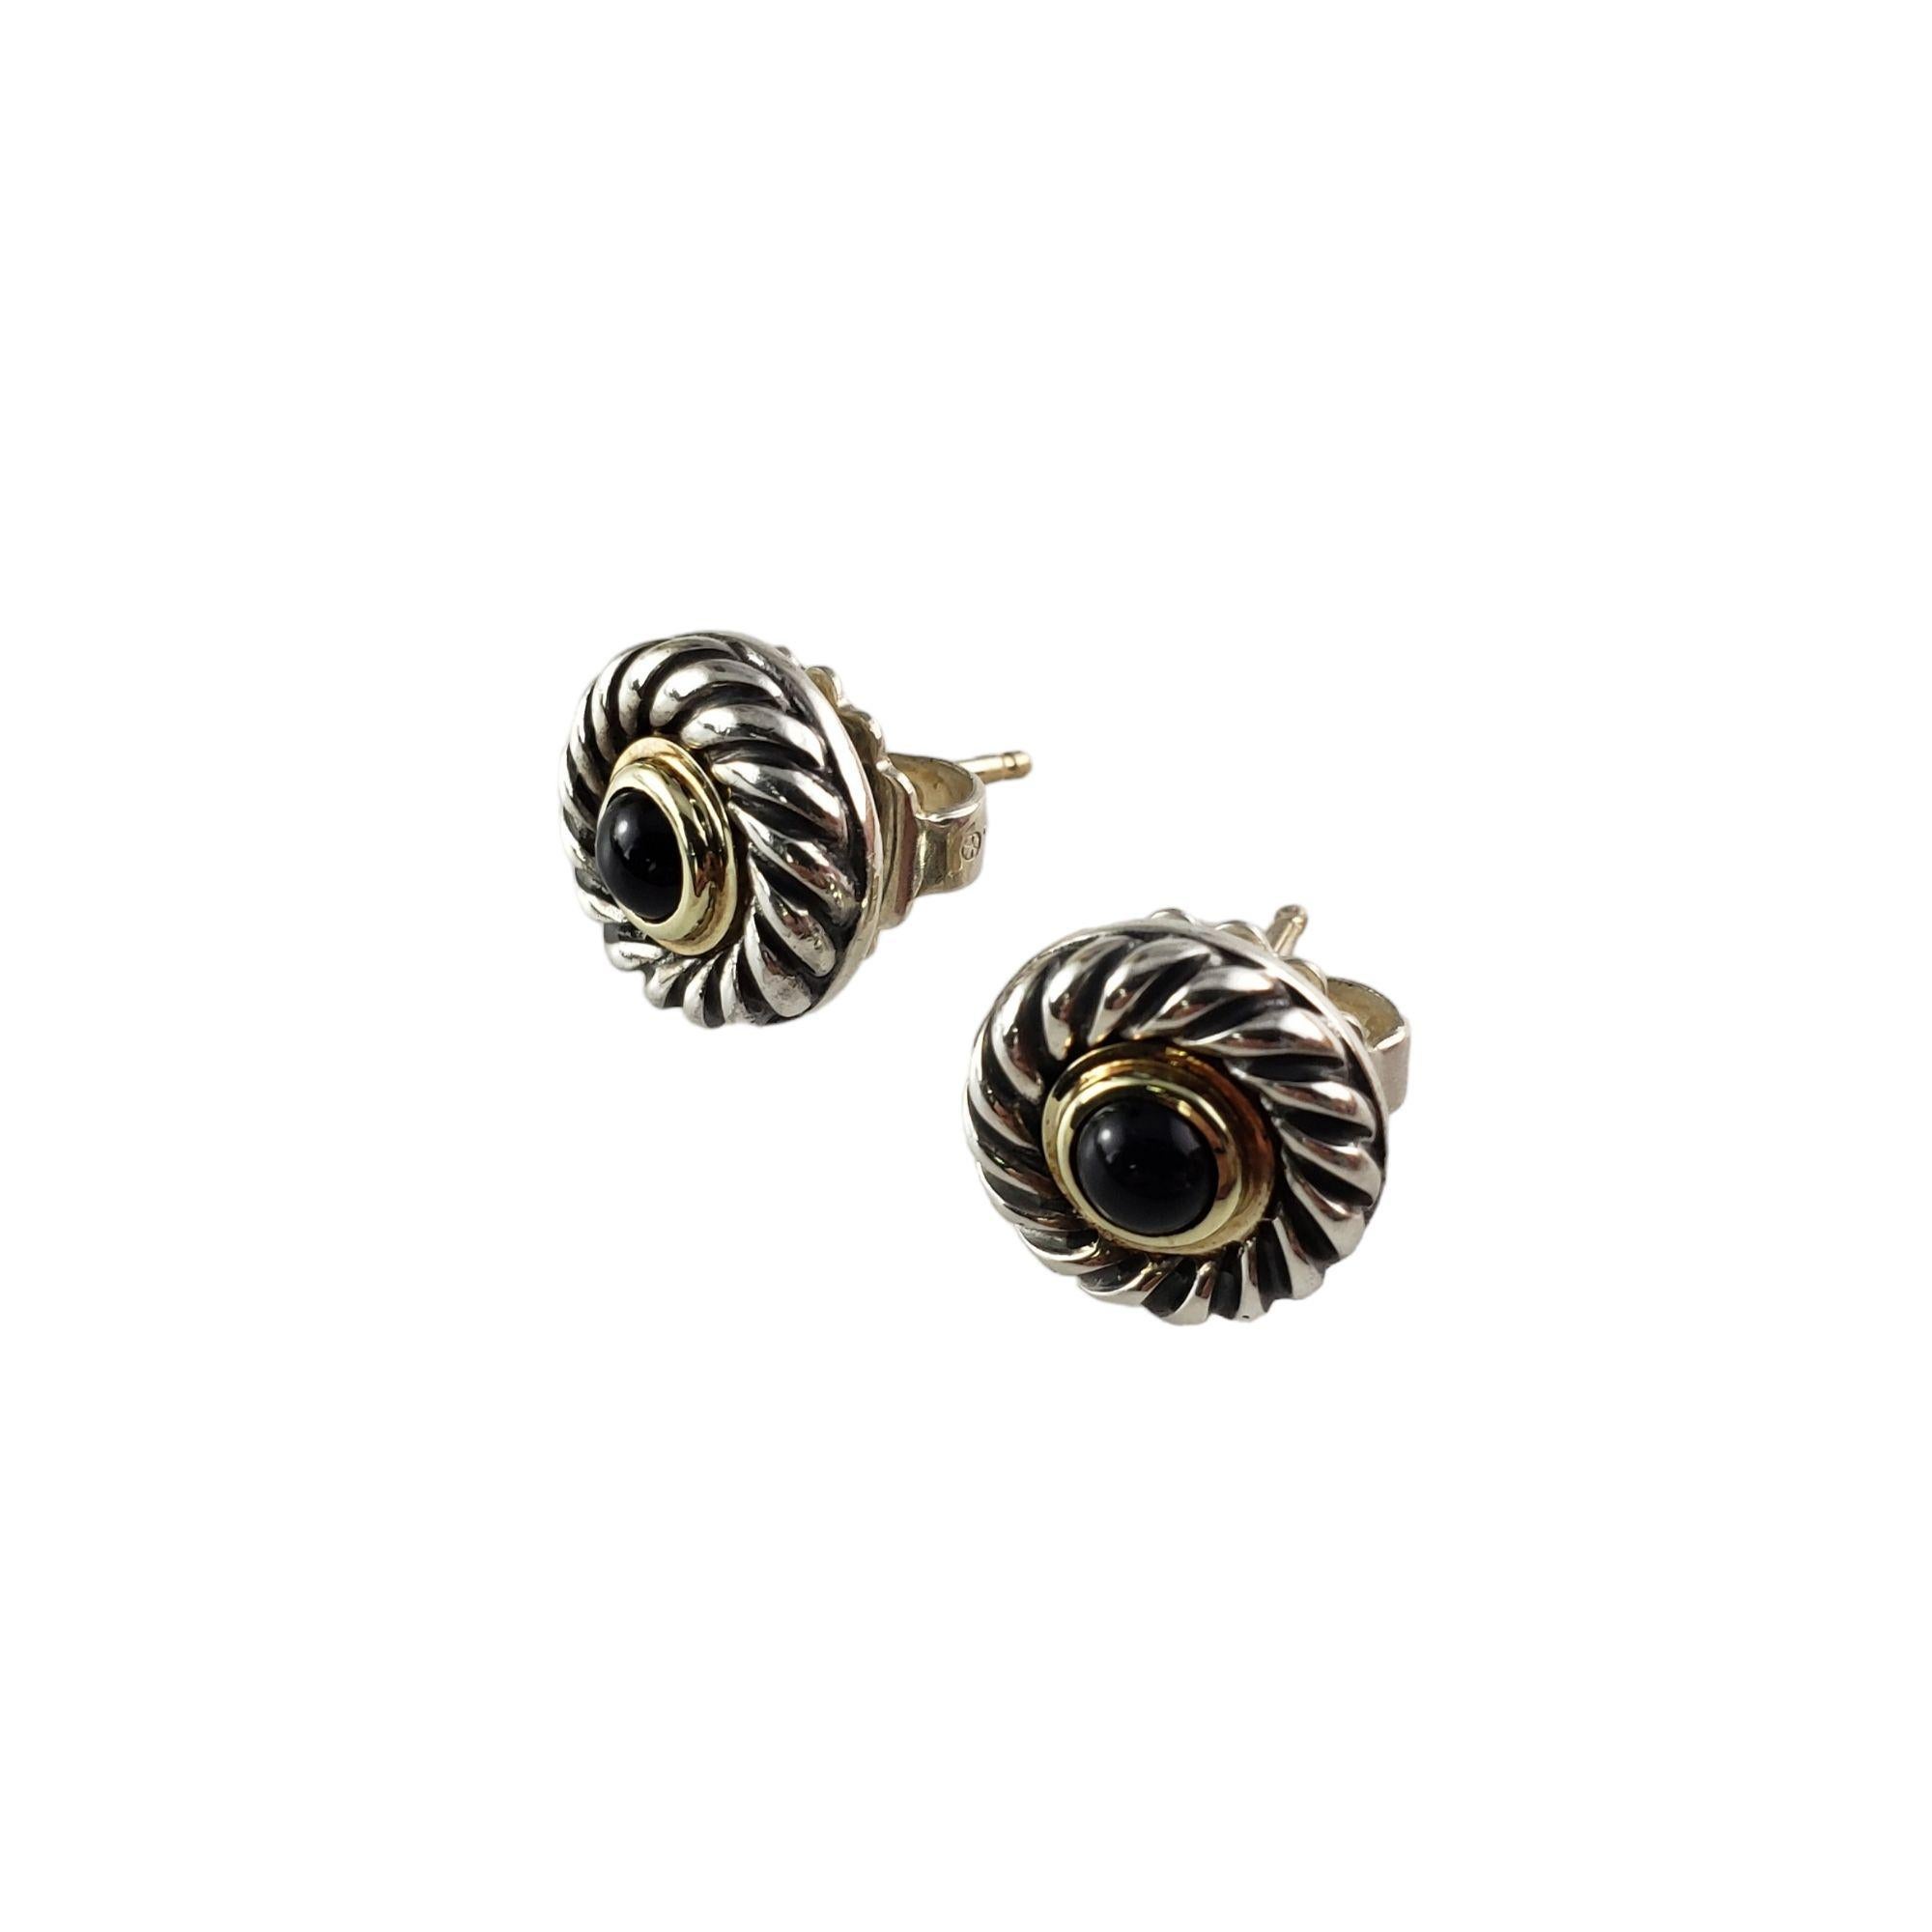 David Yurman Sterling Silver/14 Karat Yellow Gold and Onyx Cookie Earrings-

These lovely stud earrings by David Yurman each feature one round onyx stone (3 mm) set in 14K yellow gold and sterling silver.

Size: 11 mm

Weight: 4.0 dwt./6.3